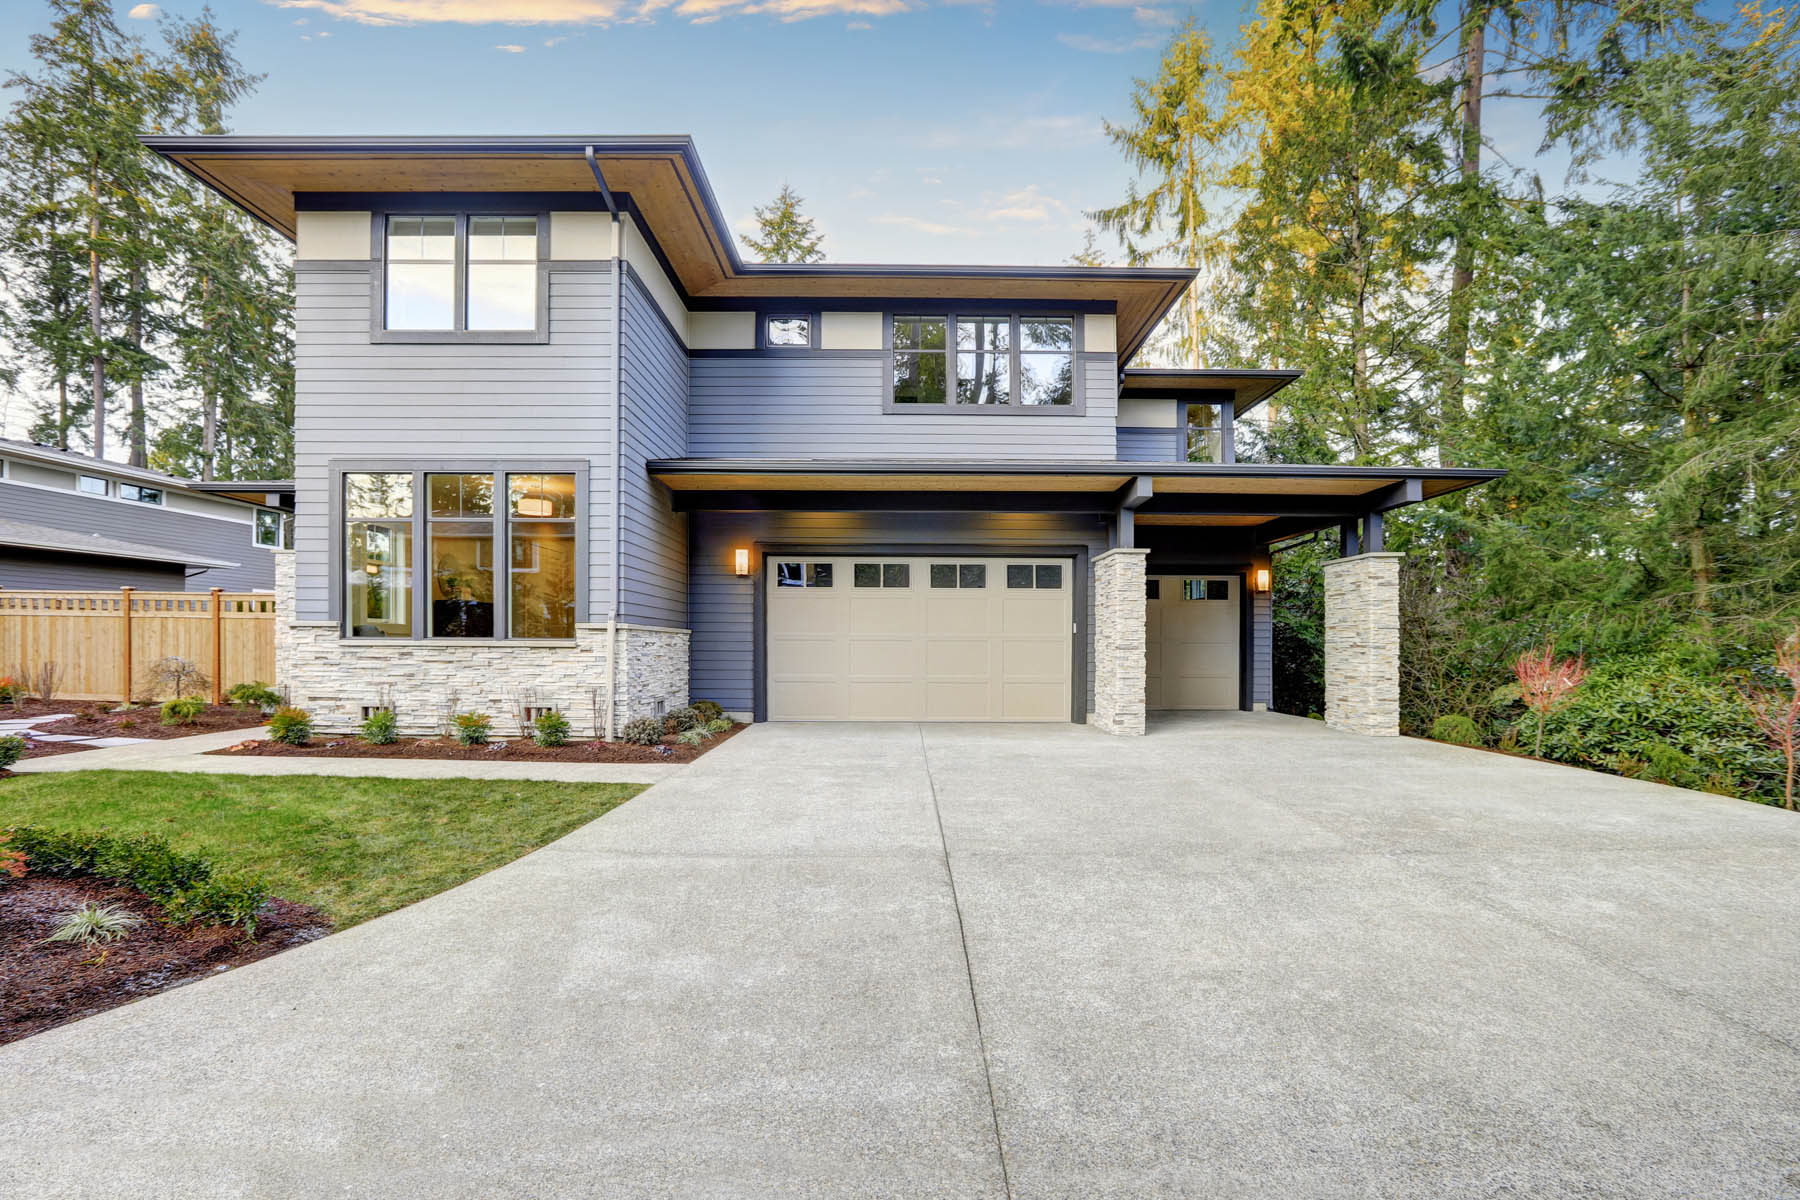 Keywords: driveway, heating system

Modified description: A modern home with a heated driveway.